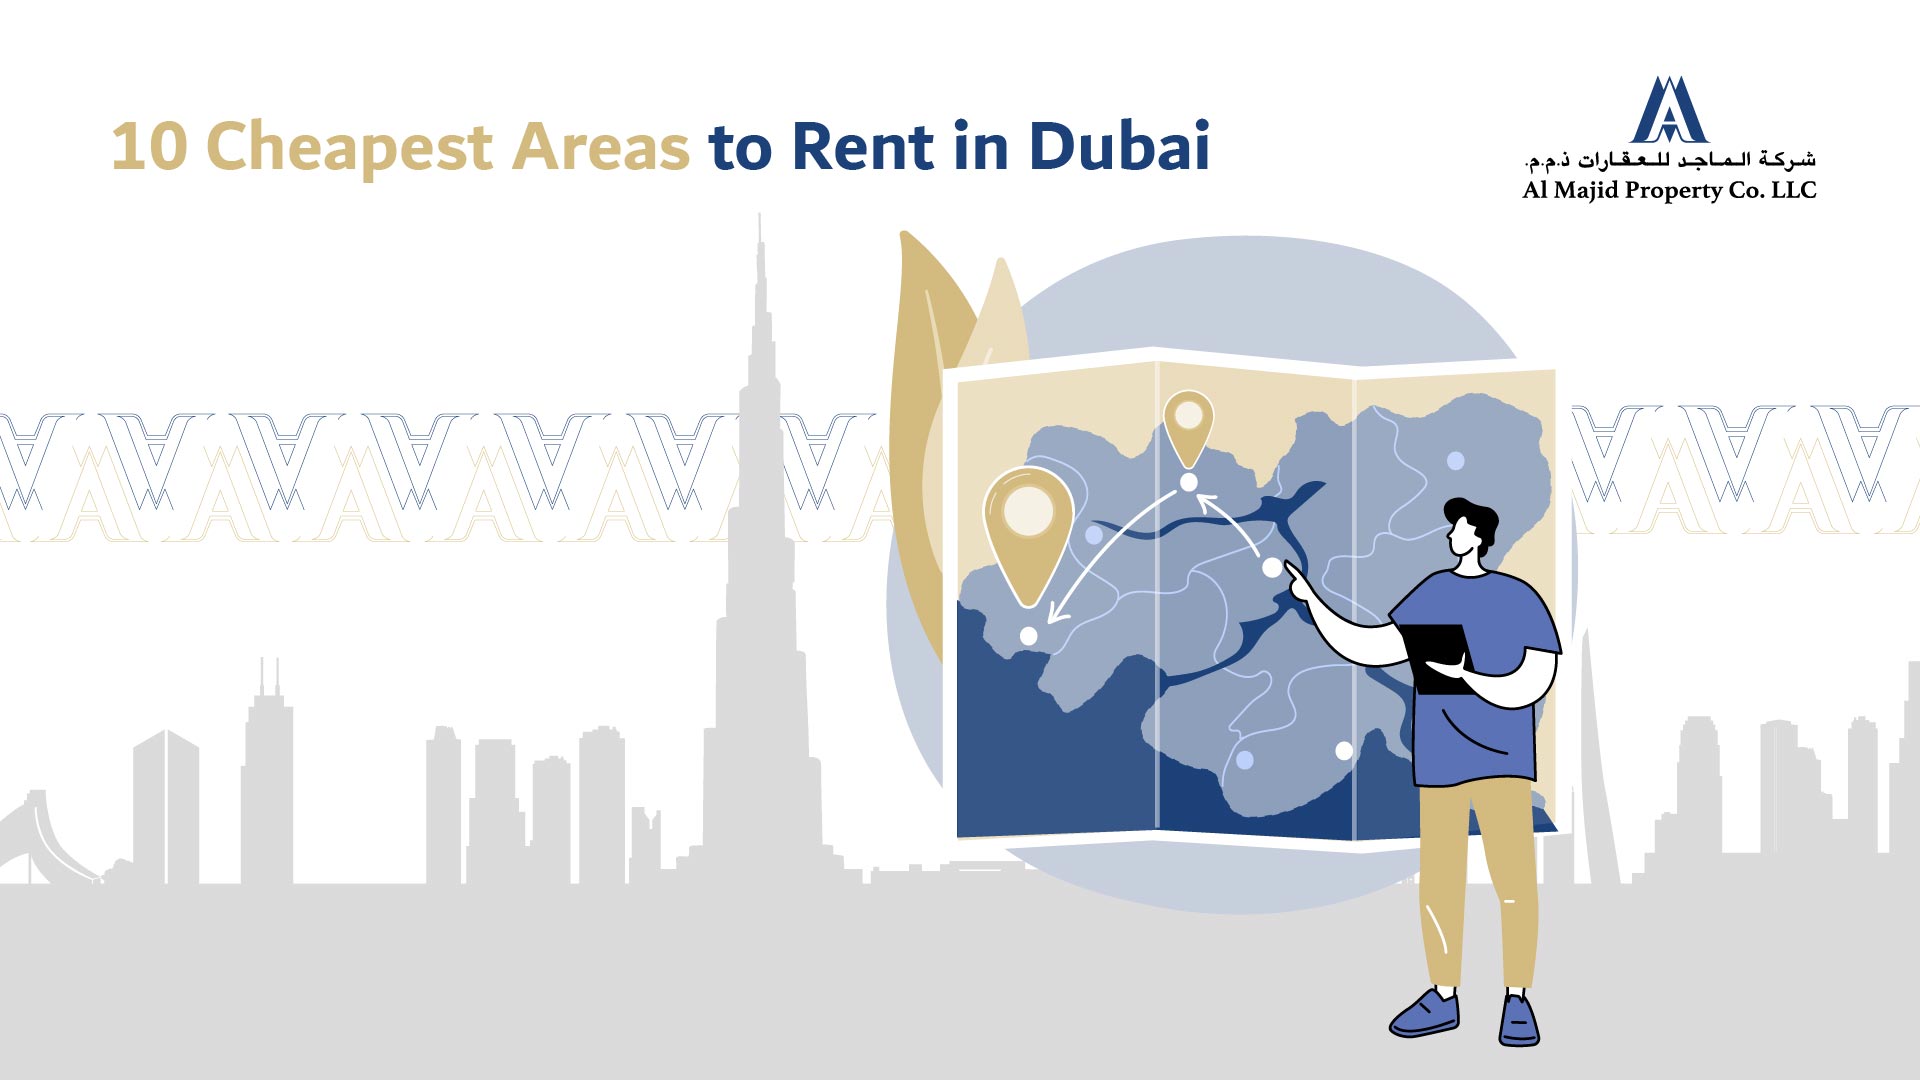 Cheapest areas to rent in Dubai